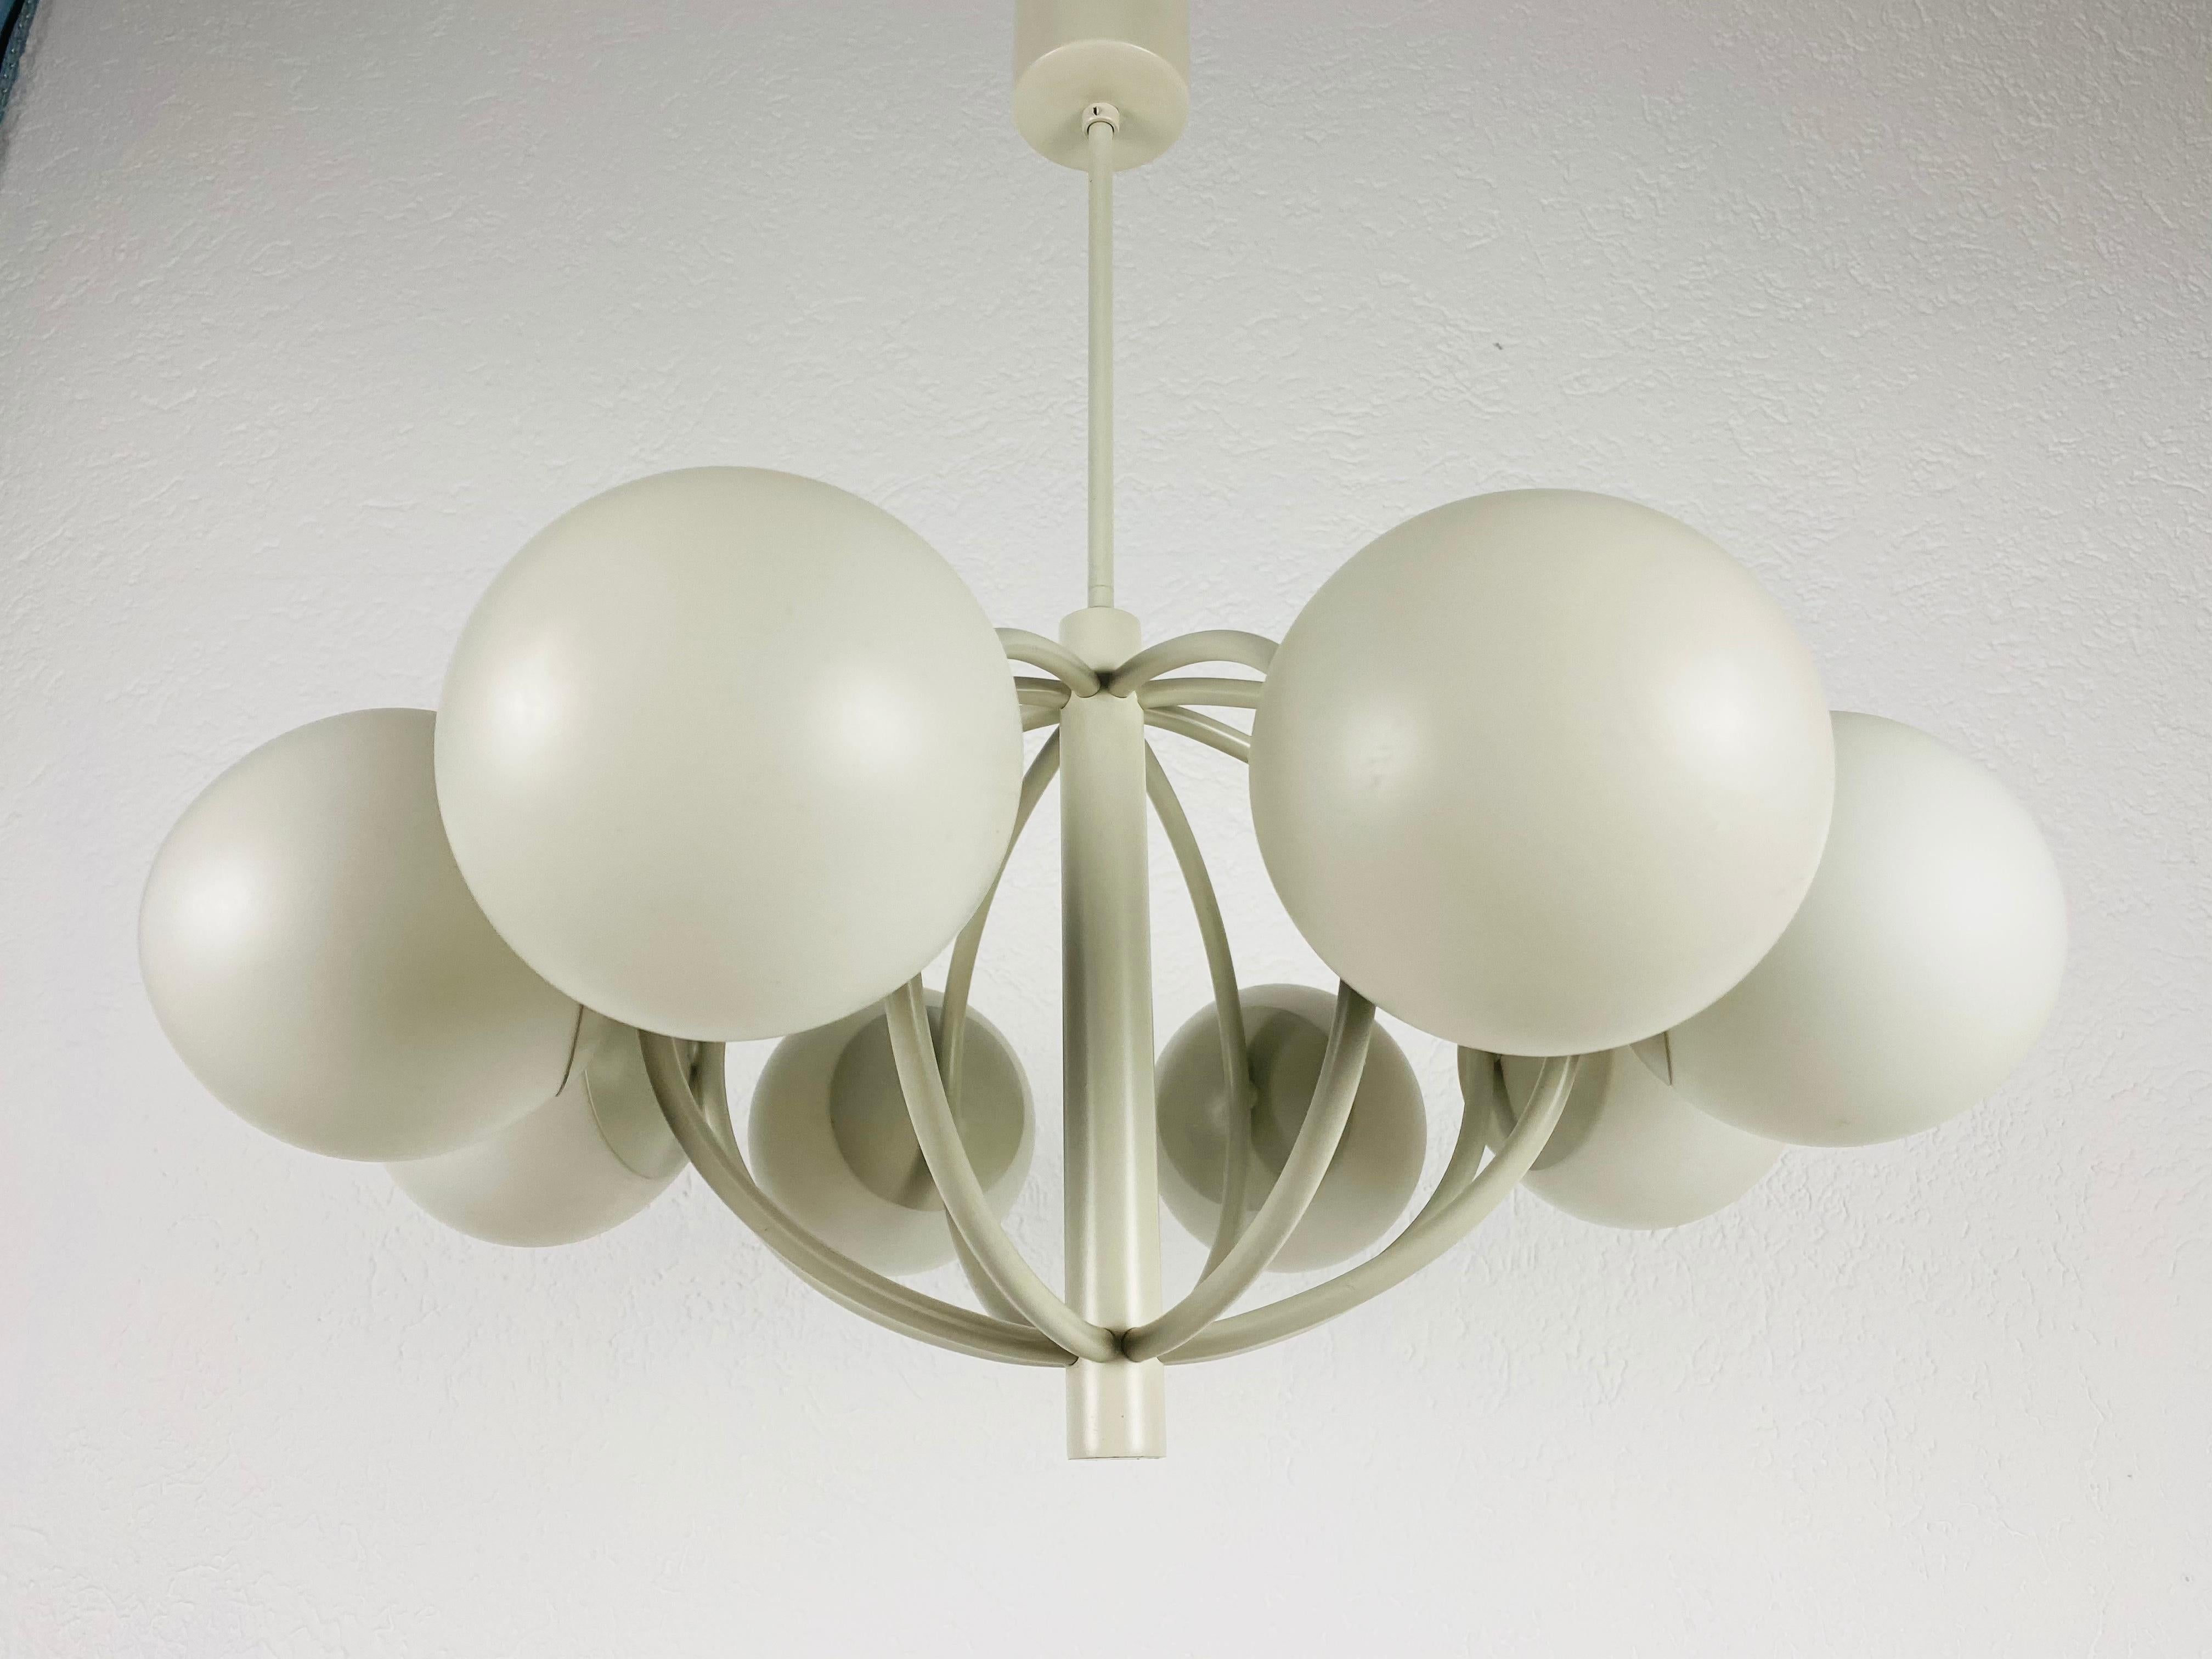 Large Kaiser Midcentury White 8-Arm Space Age Chandelier, 1960s, Germany For Sale 2